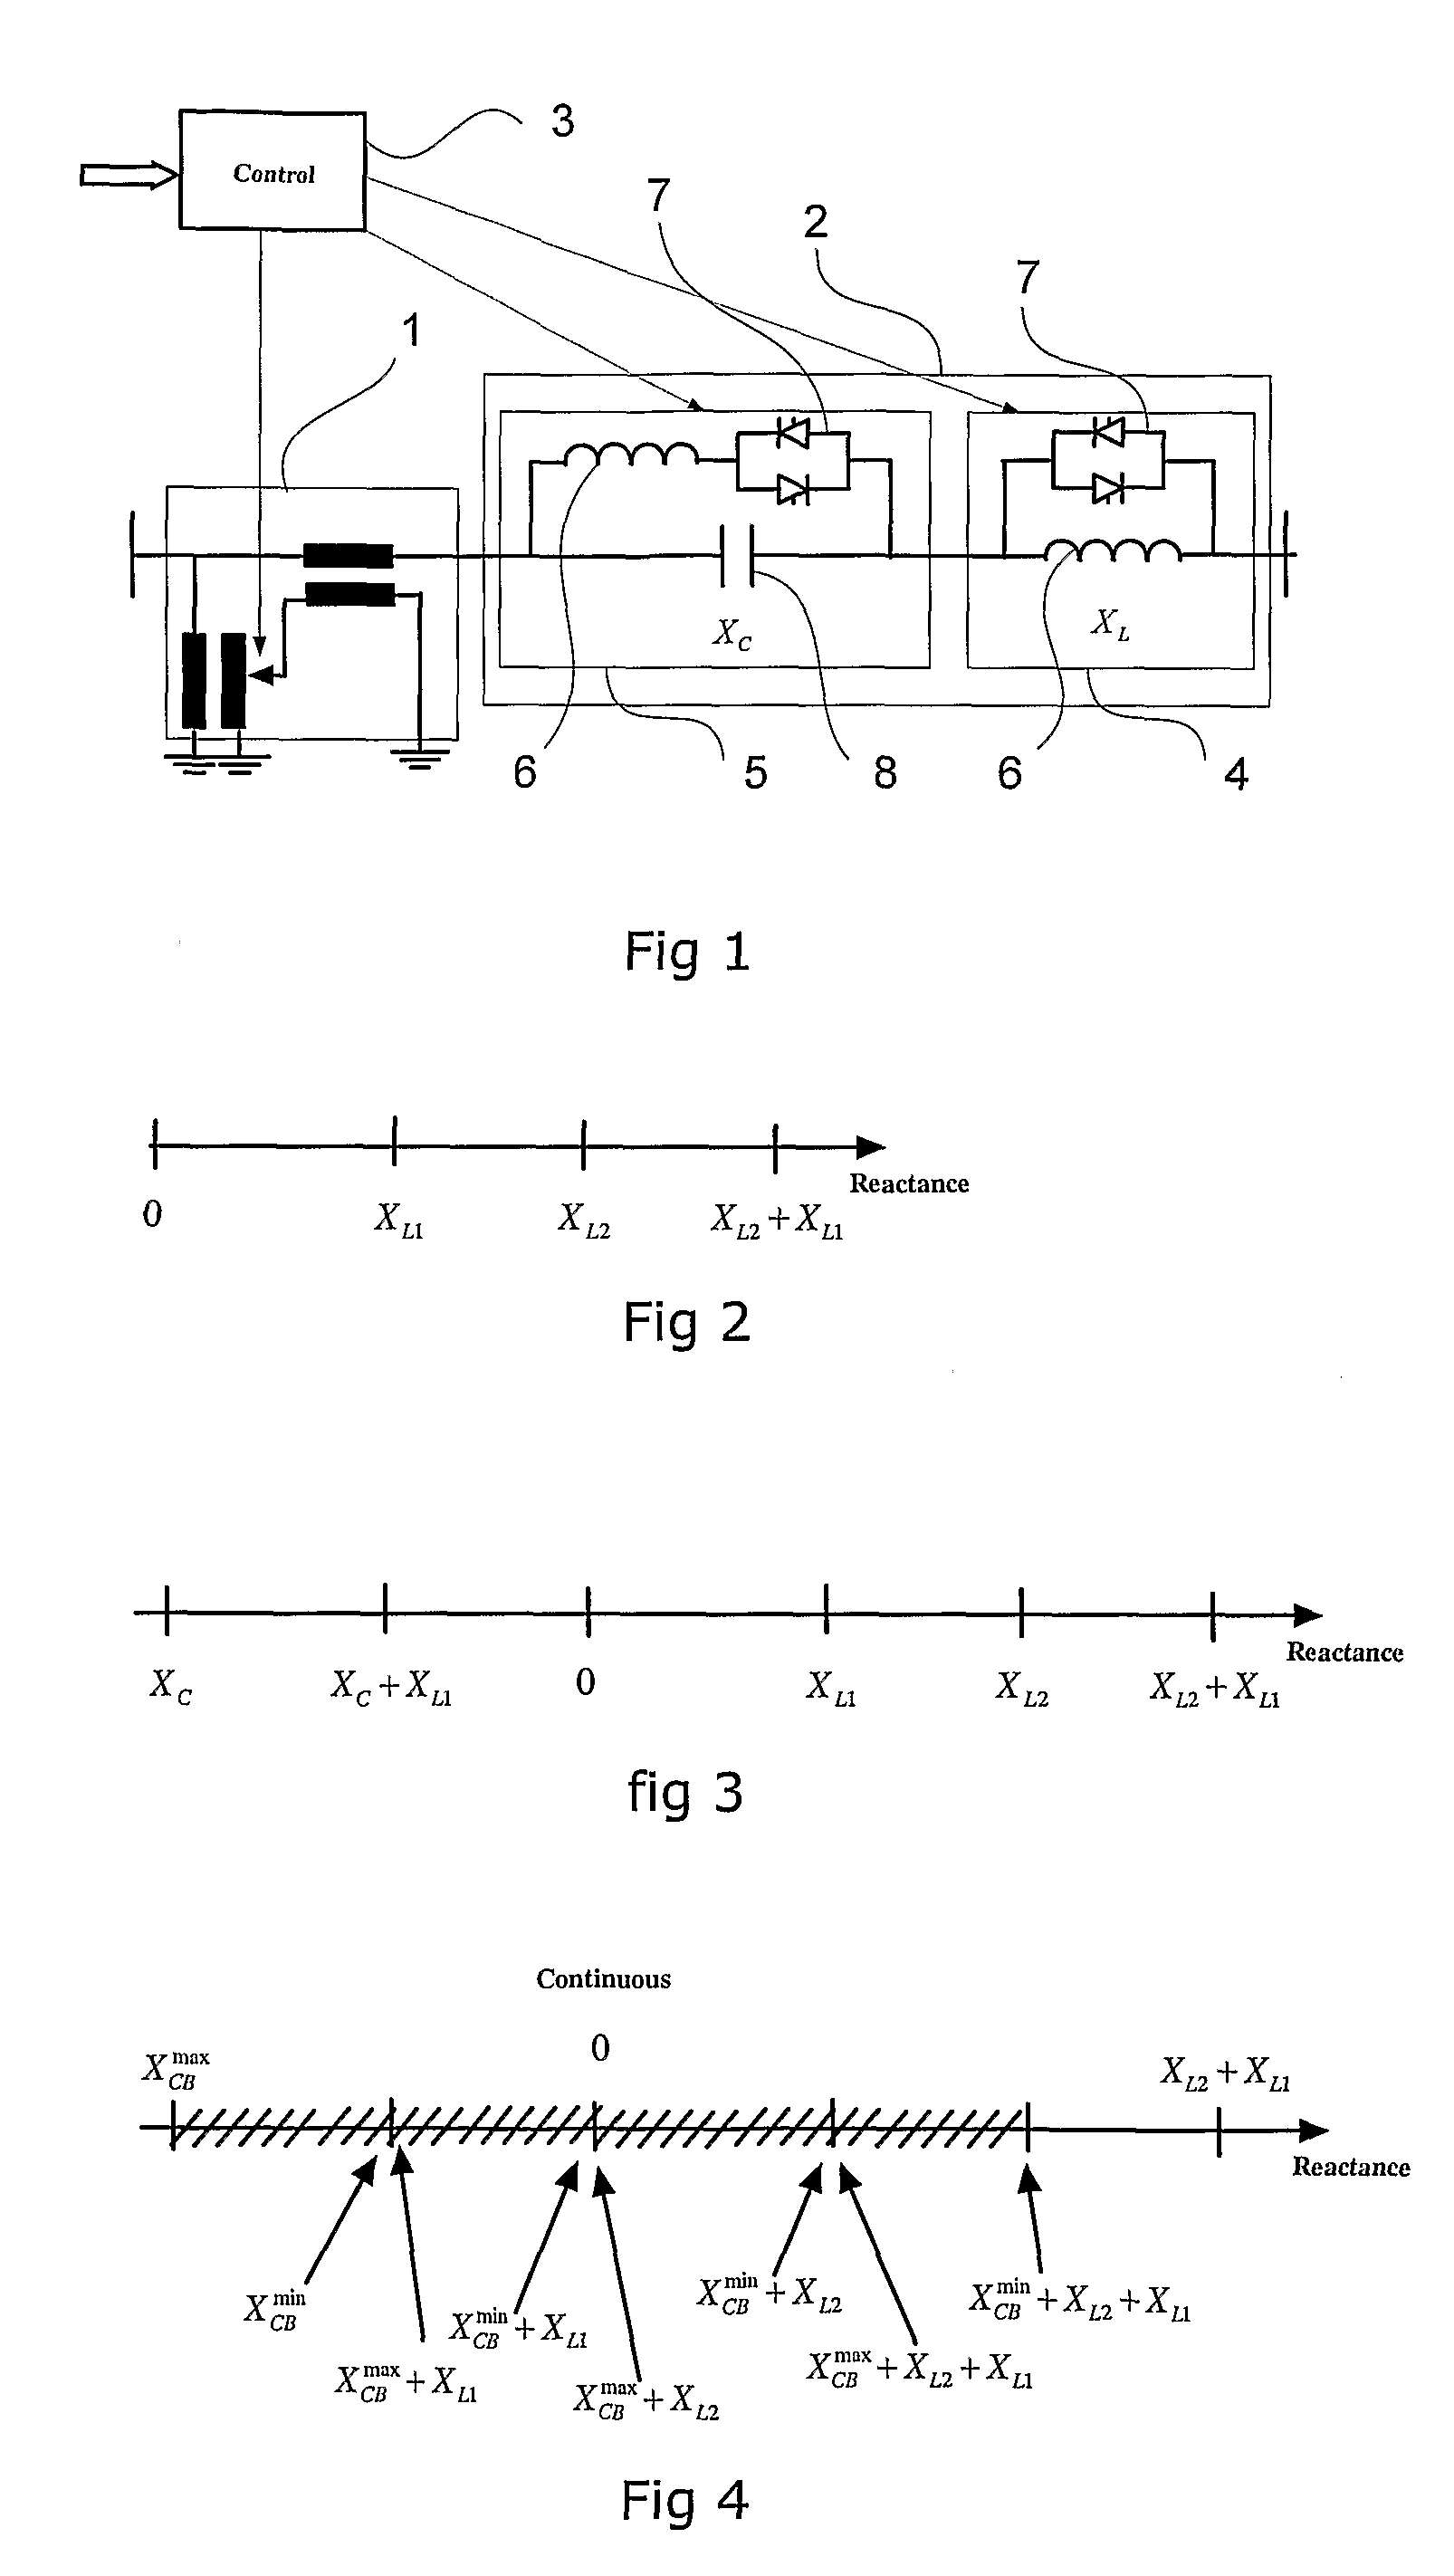 Apparatus and method for improved power flow control in a high voltage network